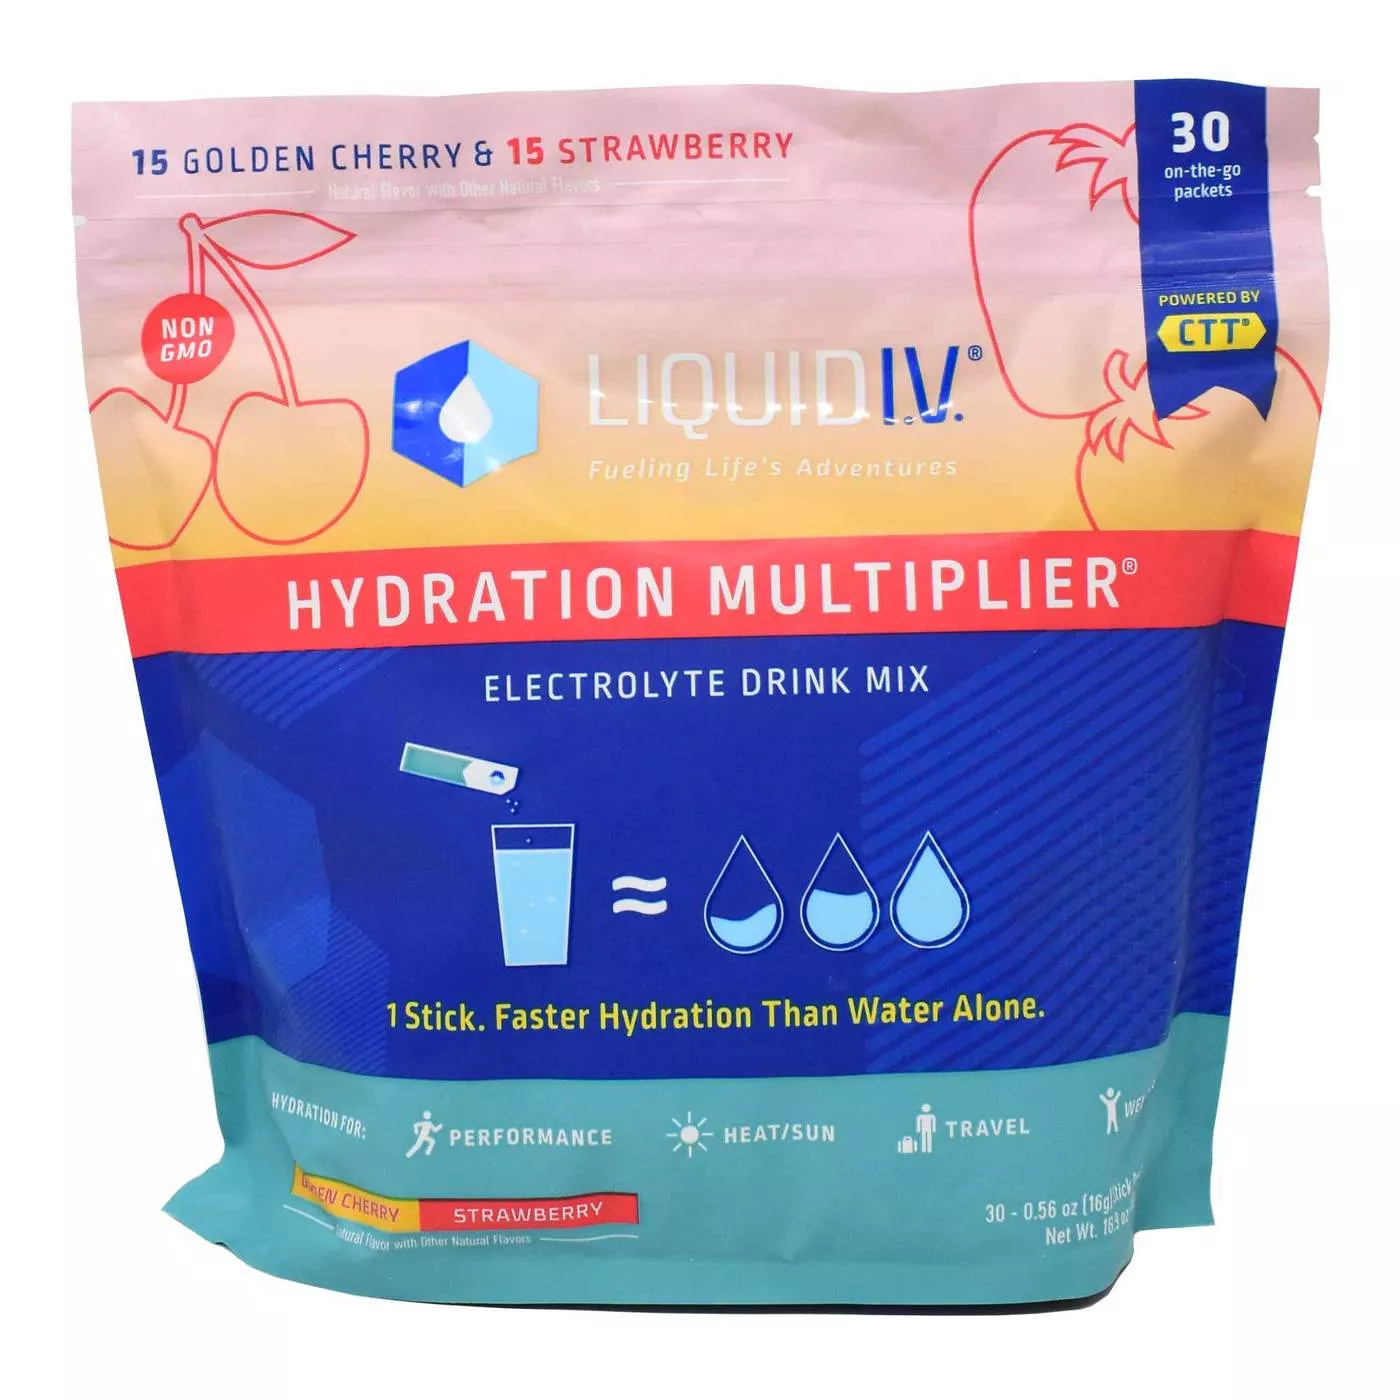 Liquid IV Hydration Multiplier, Golden Cherry and Strawberry - 30 Packets -  eVitamins South Korea